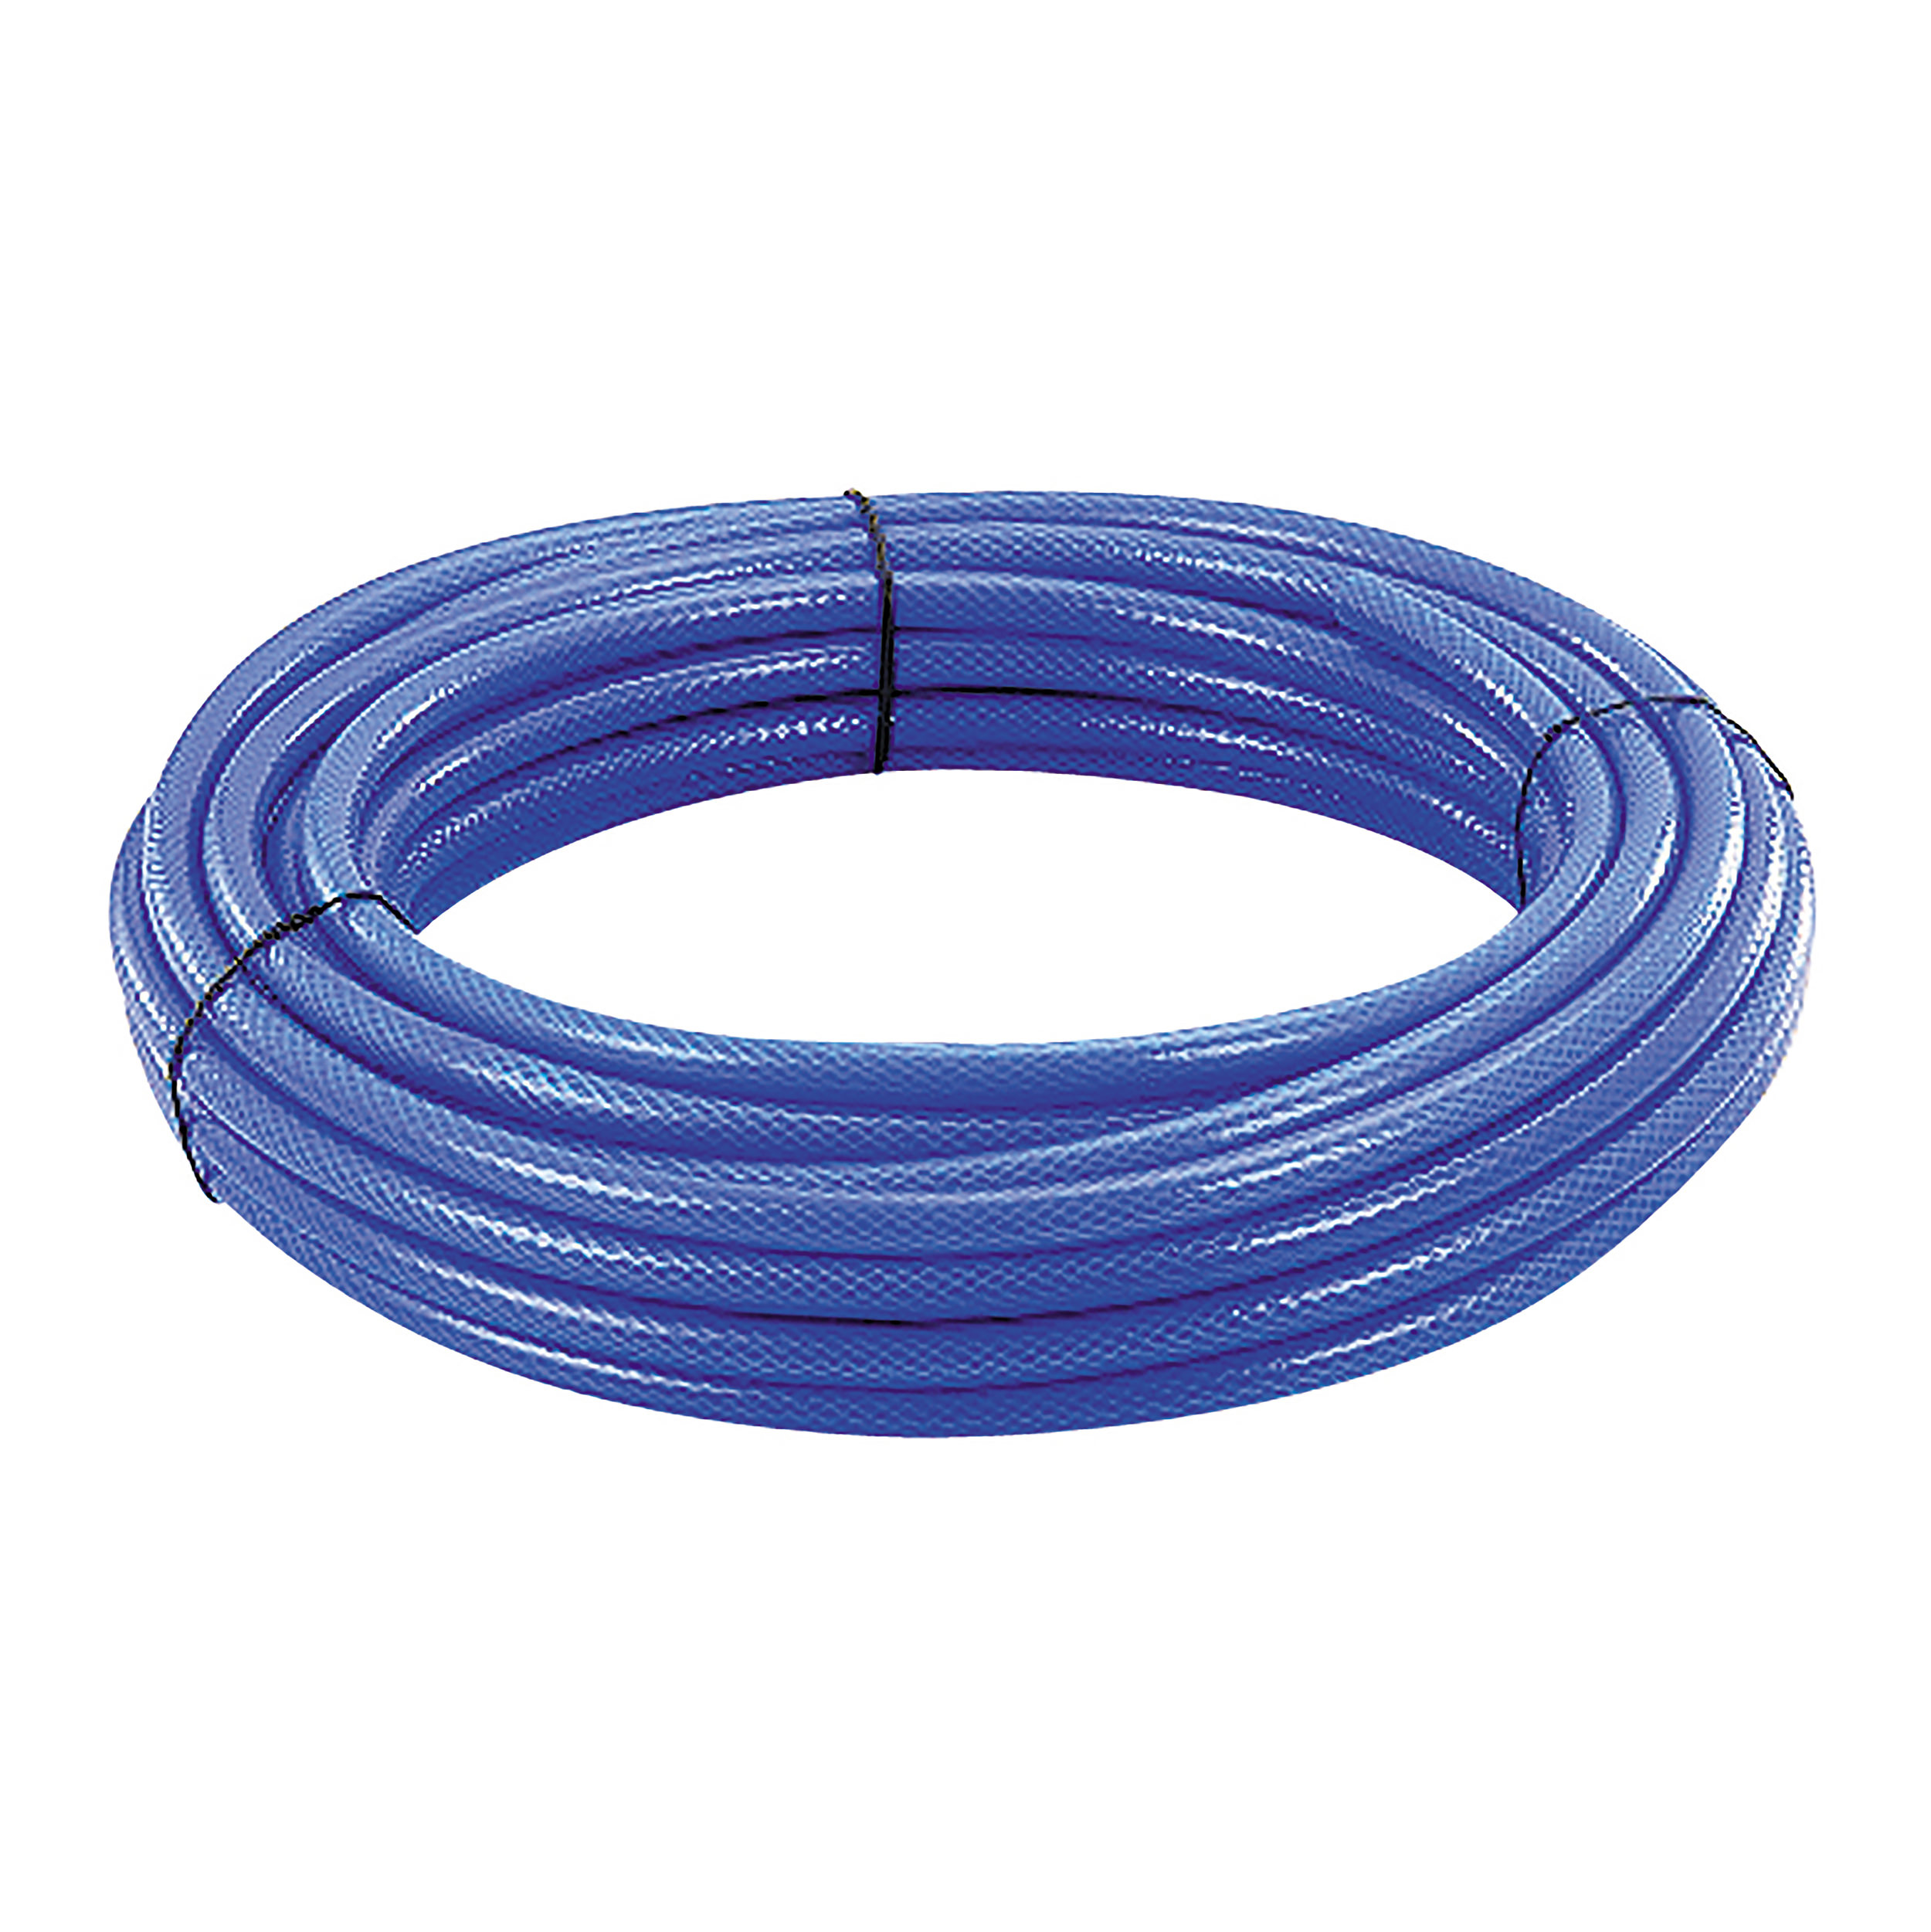 PU compressed air hose, roll 50 m, without connectors